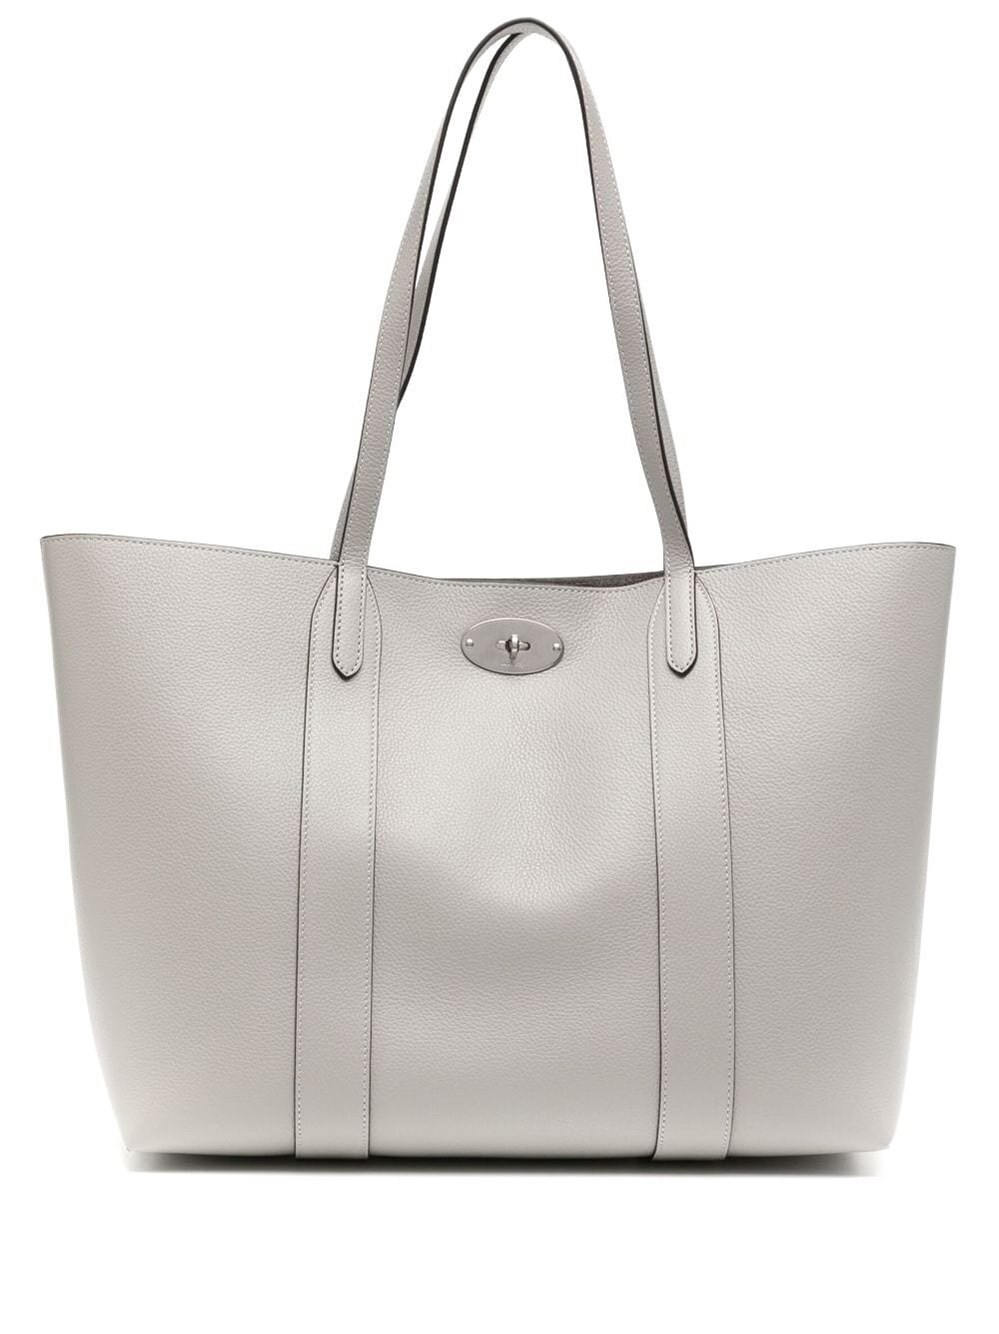 Mulberry Bayswater Tote In Gray